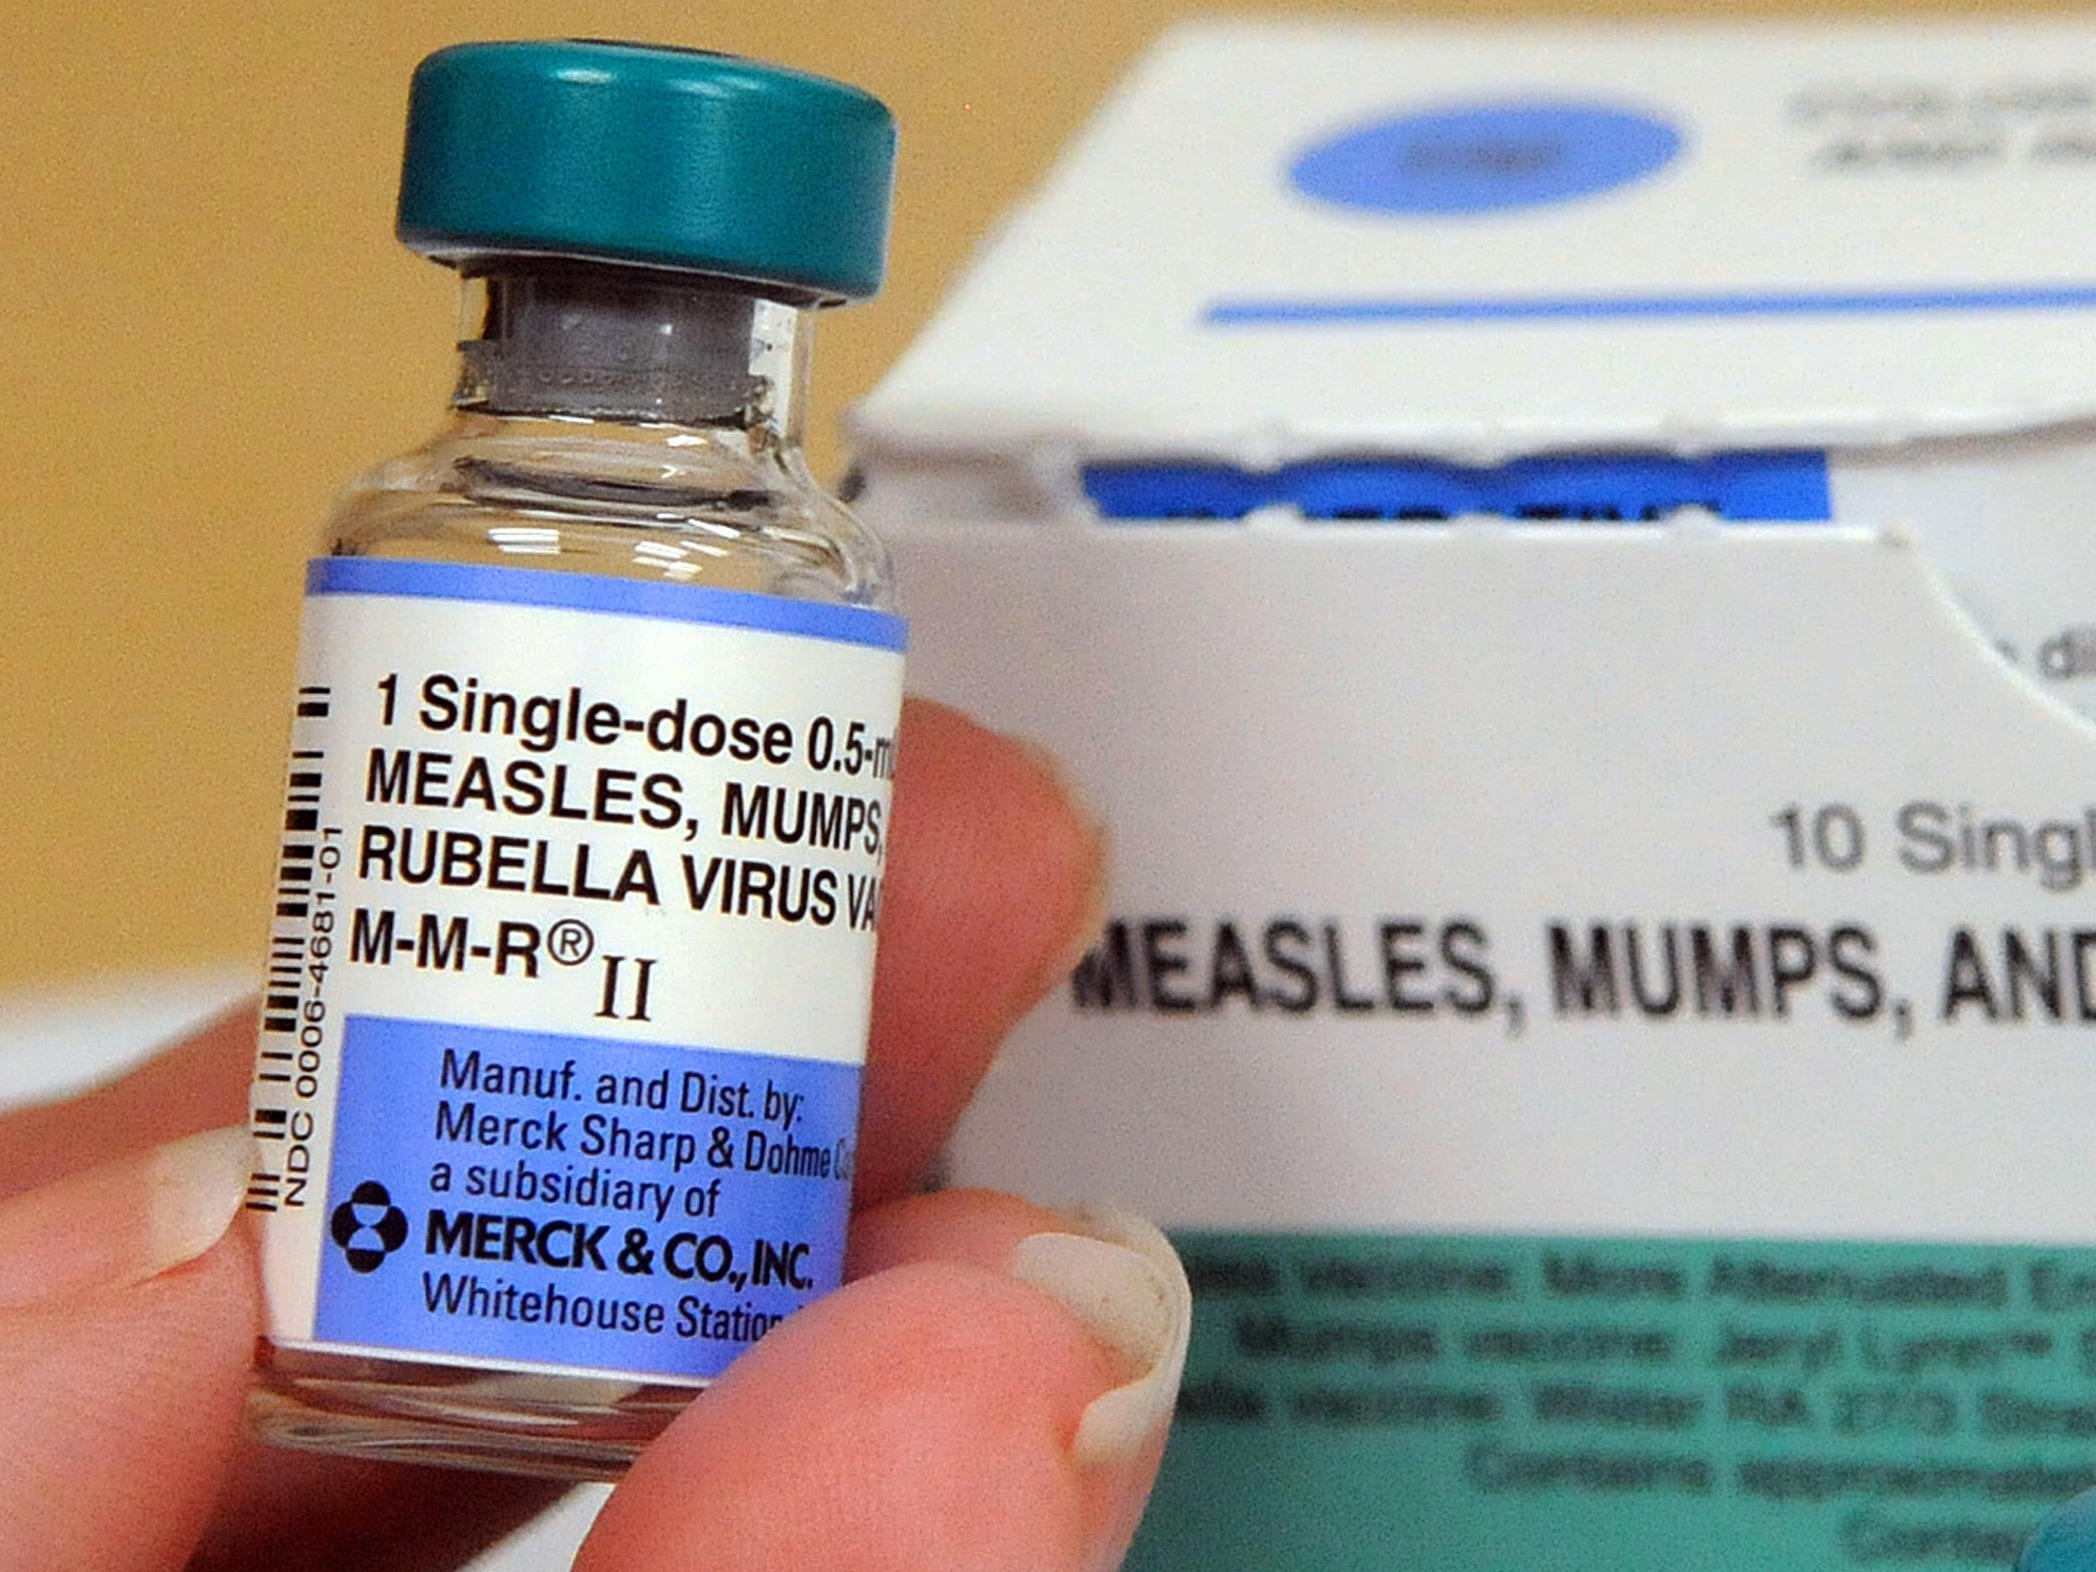 USA measles cases reach 971, breaking 1994 record